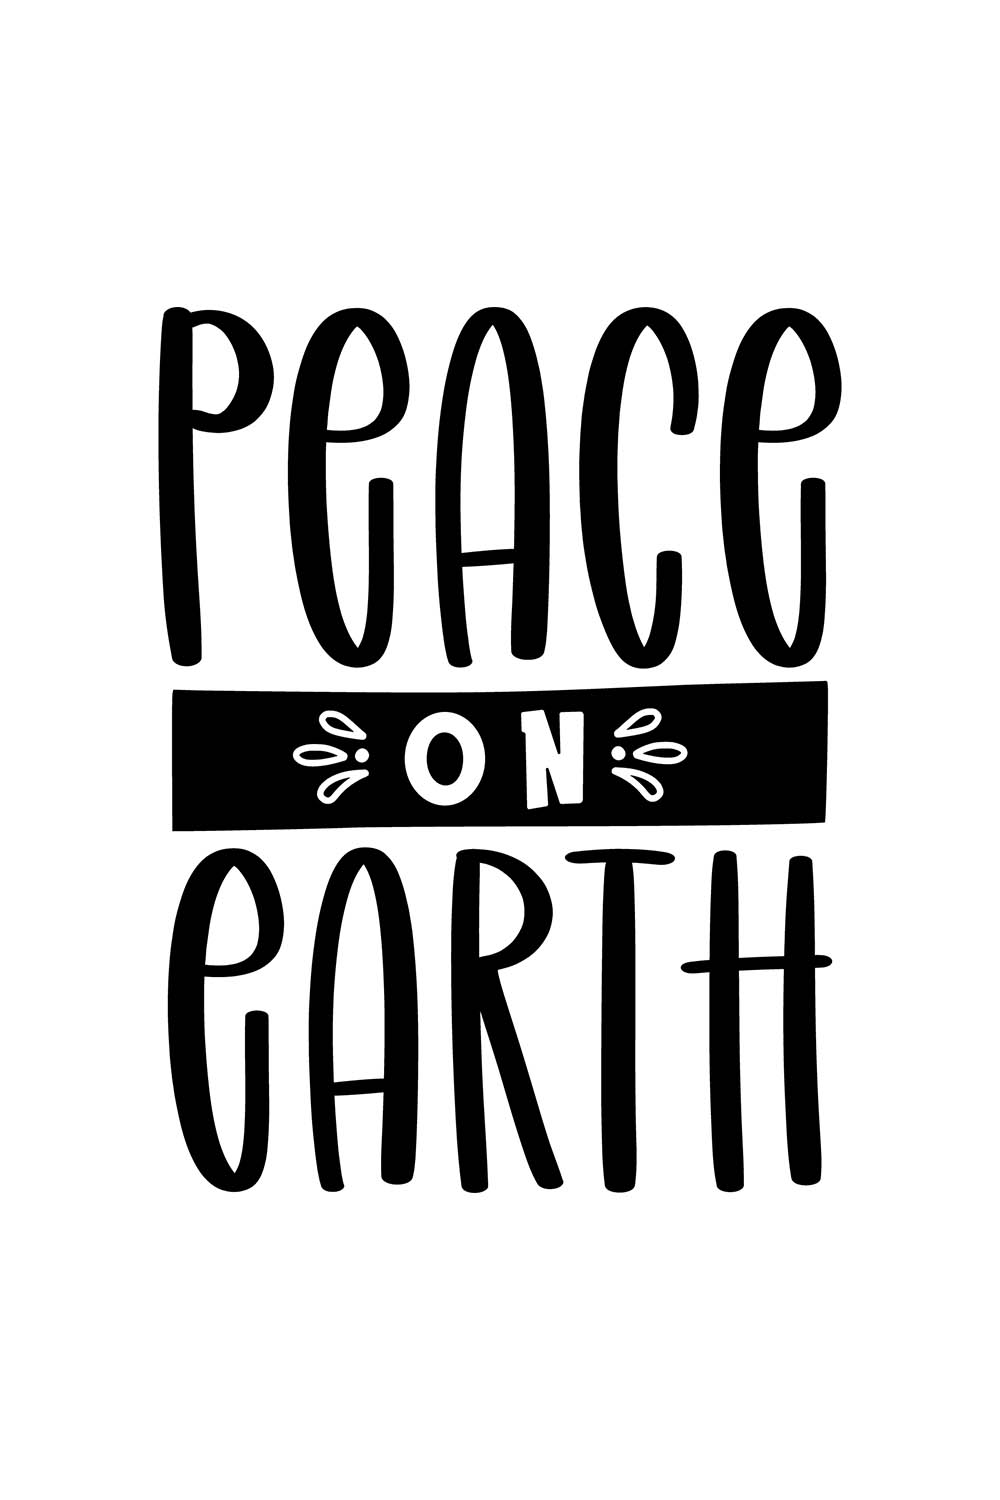 Image with elegant black lettering for Peace on Earth prints.